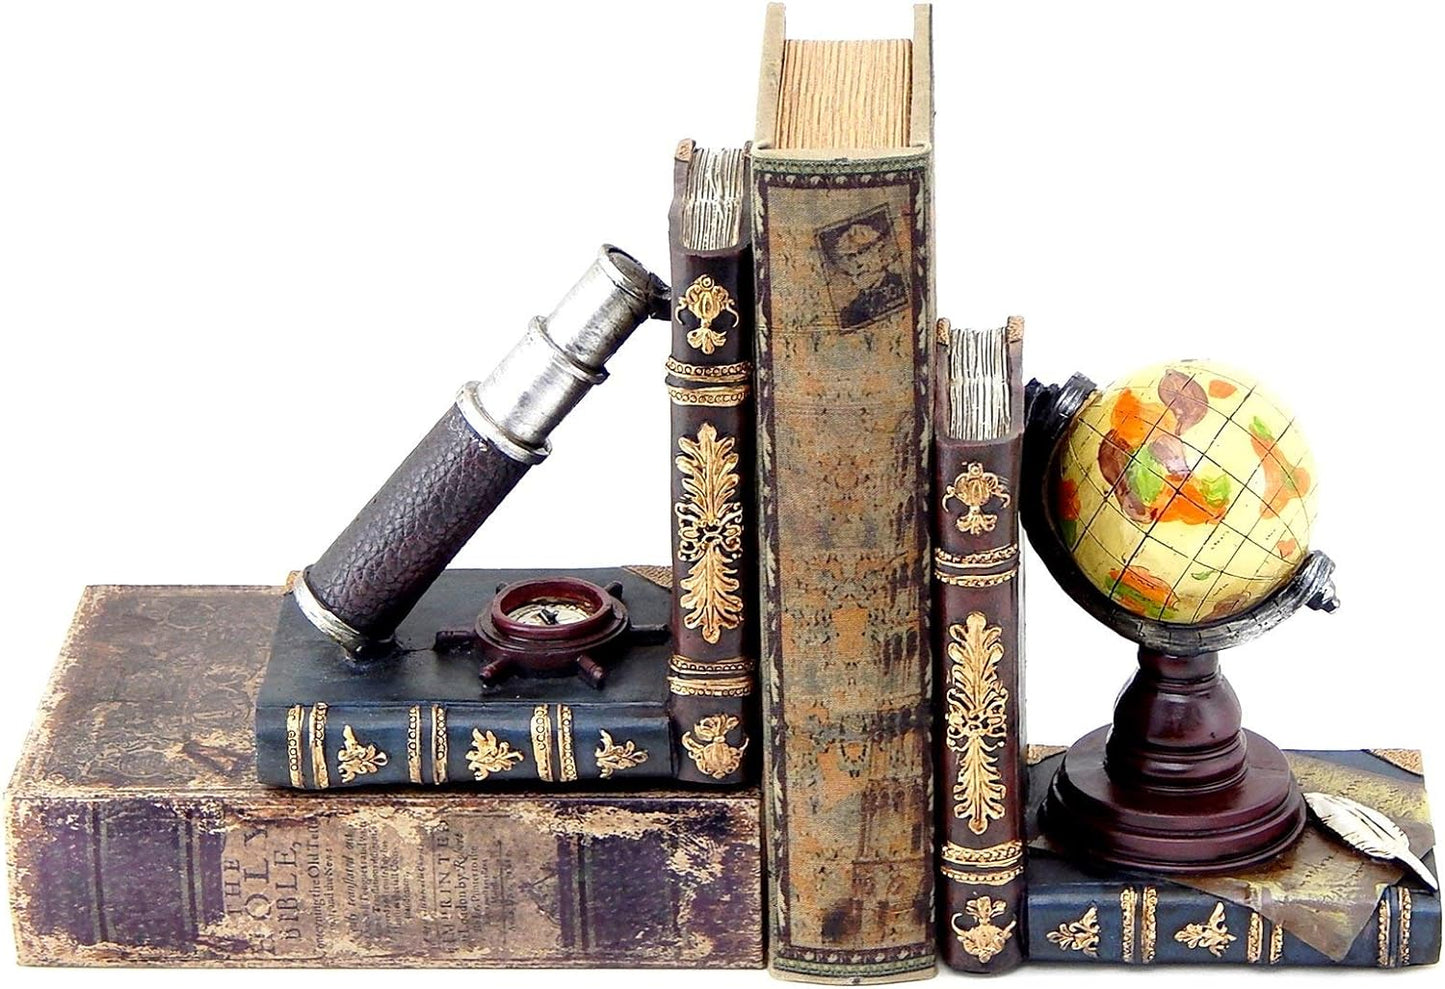 26263 Decorative Bookends Vintage Telescope Globe Book Ends Holder Support Antiques Pirate Old World Nautical Farmhouse Country Cottage Home Decor